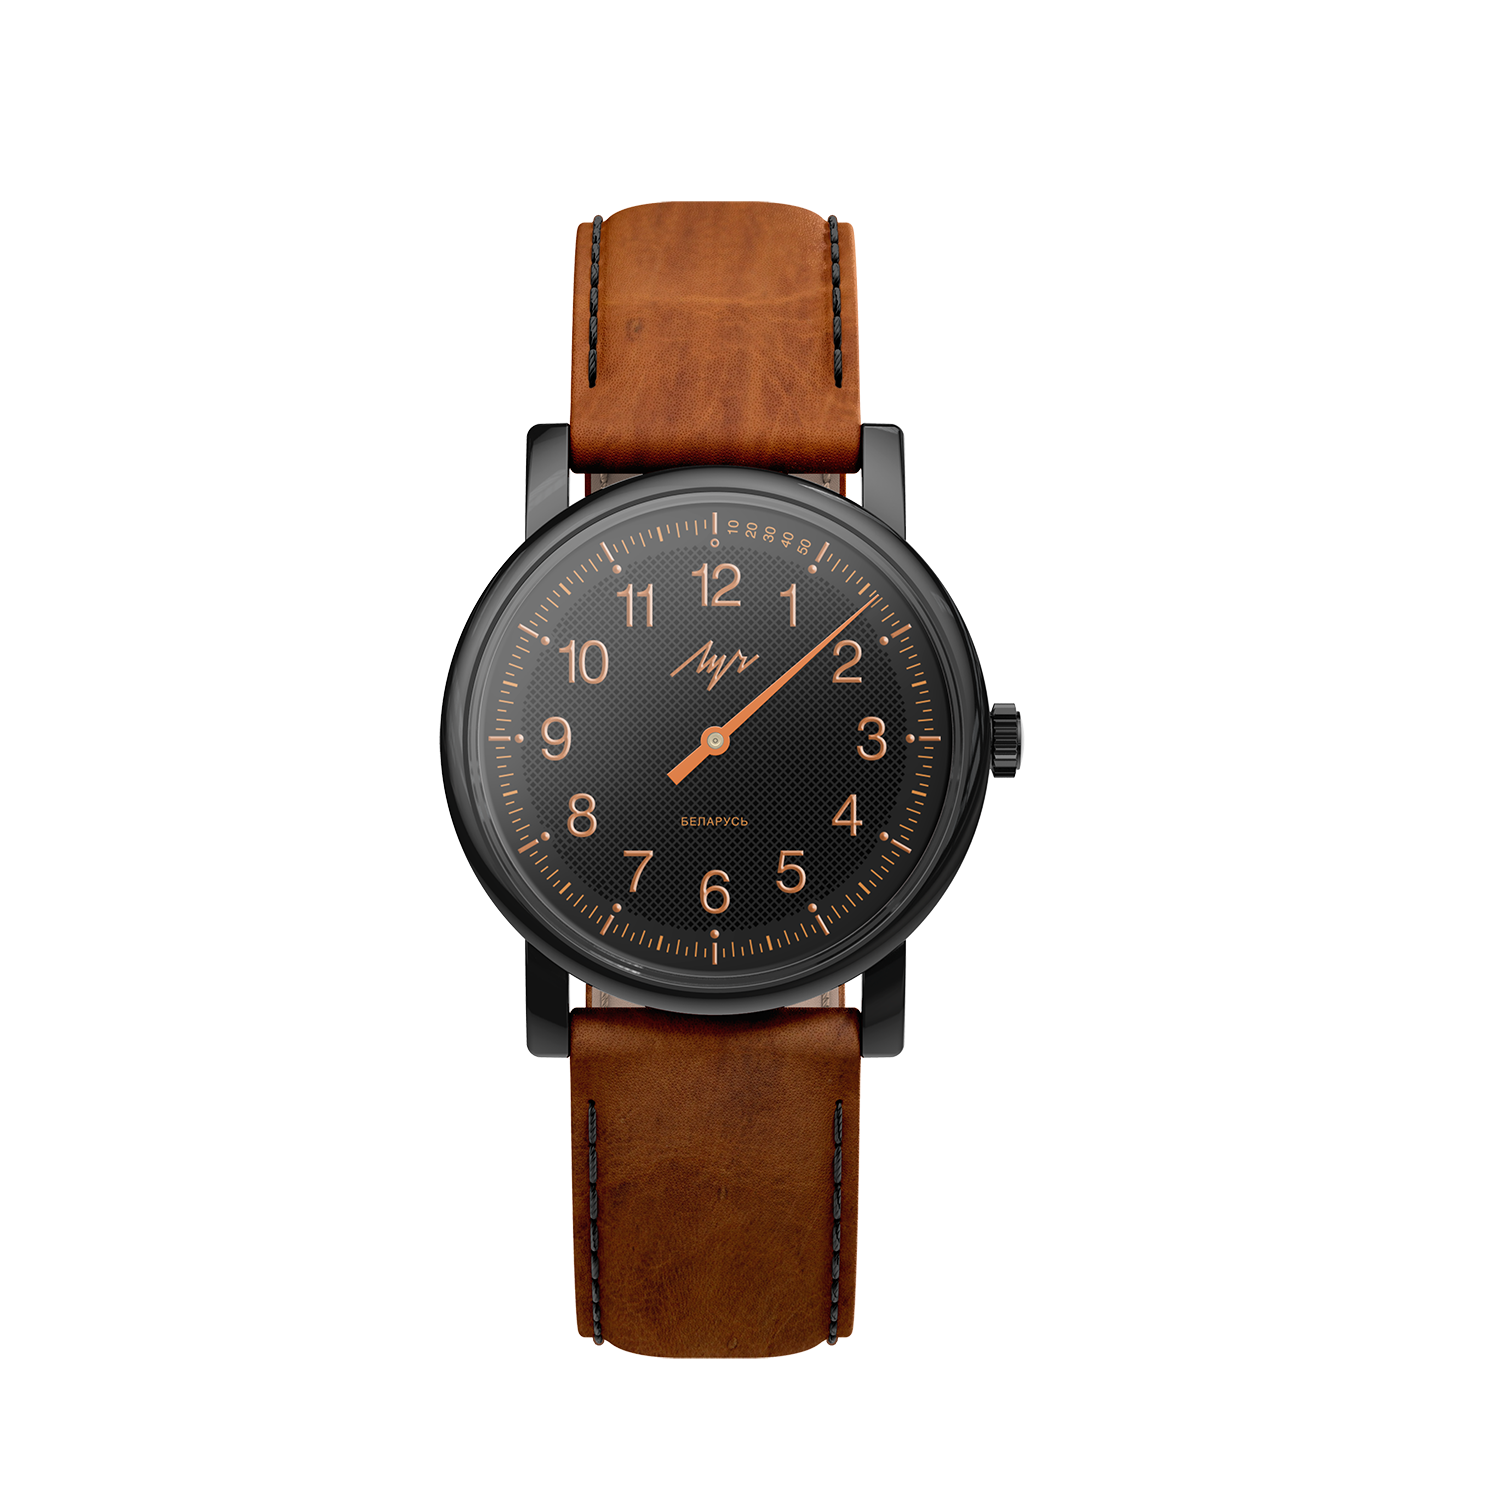 Hand watch One-hand watch 71957989 | Luch official online store